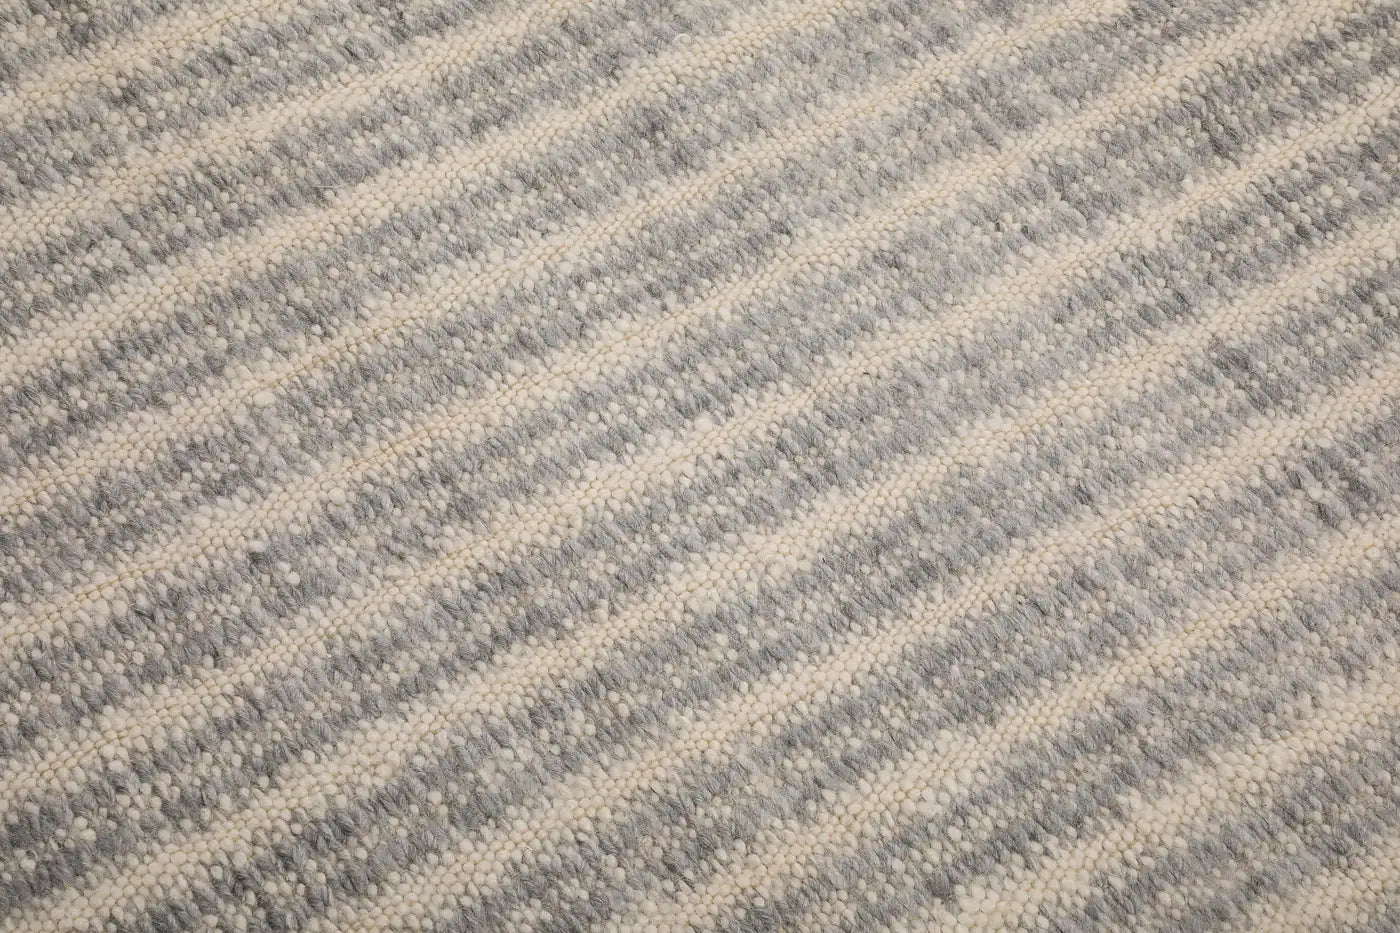 Ribbed Mohair Hand-Knotted Area Rug by Ennui Home